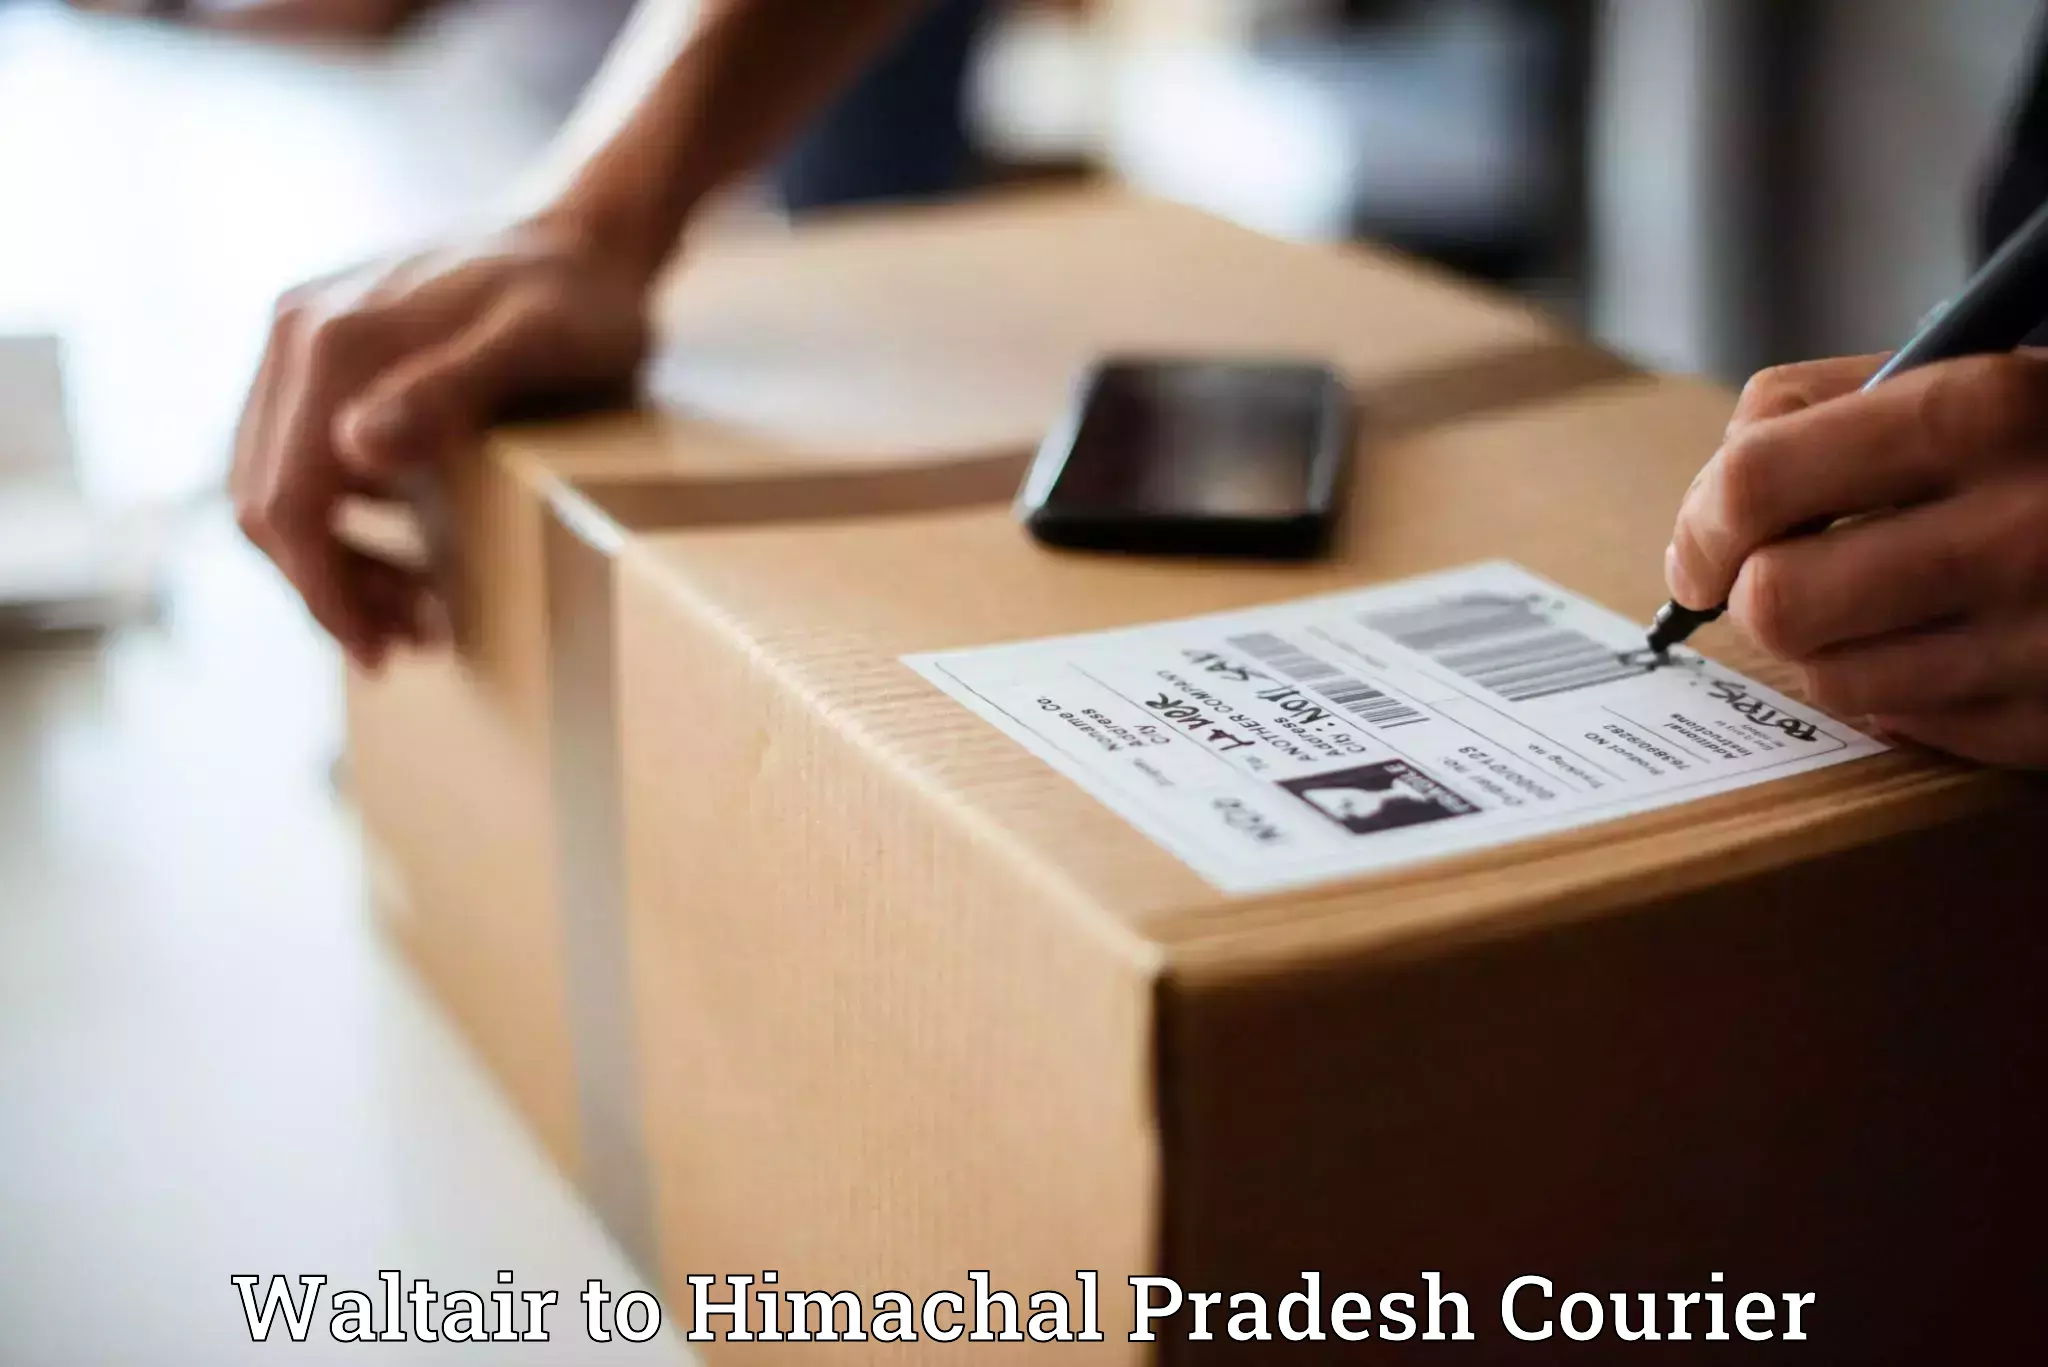 State-of-the-art courier technology Waltair to Bilaspur Himachal Pradesh